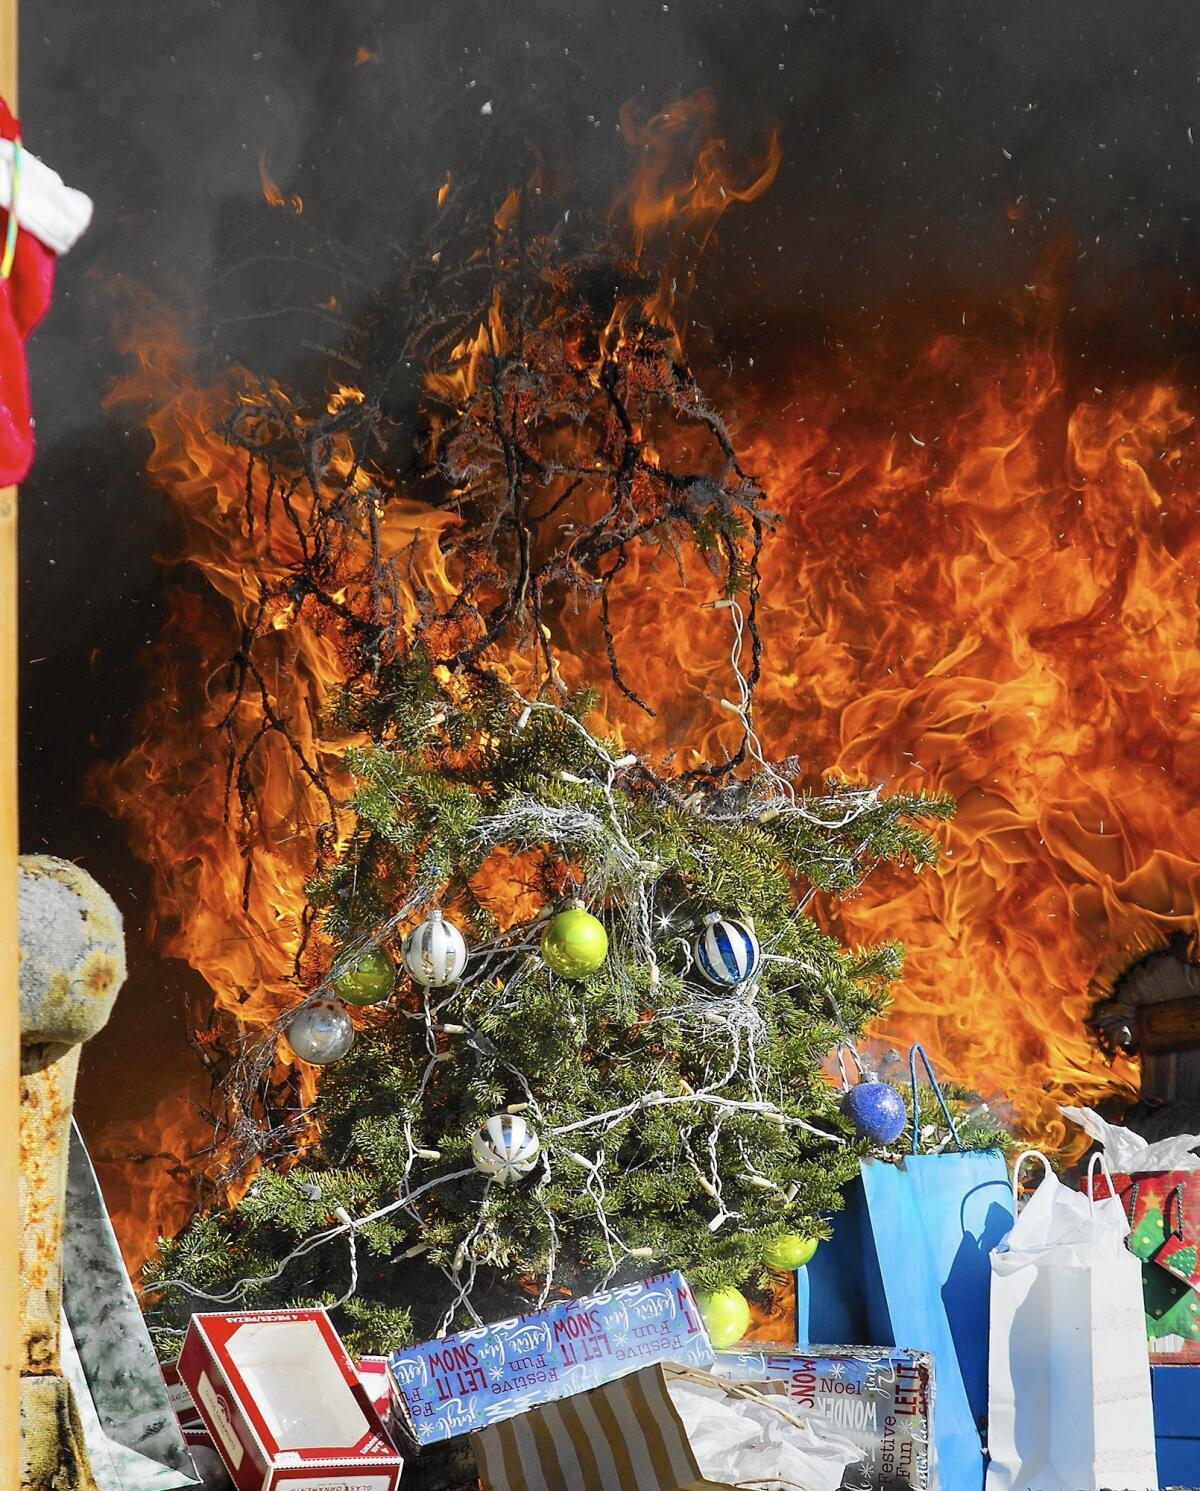 A decorated Christmas tree is engulfed in flames during a fire safety demonstration Tuesday at the Orange County Fire Authority training facility in Irvine. It was part of a campaign intended to alert the public to how easily and quickly a tree can ignite and spread fire in a home.